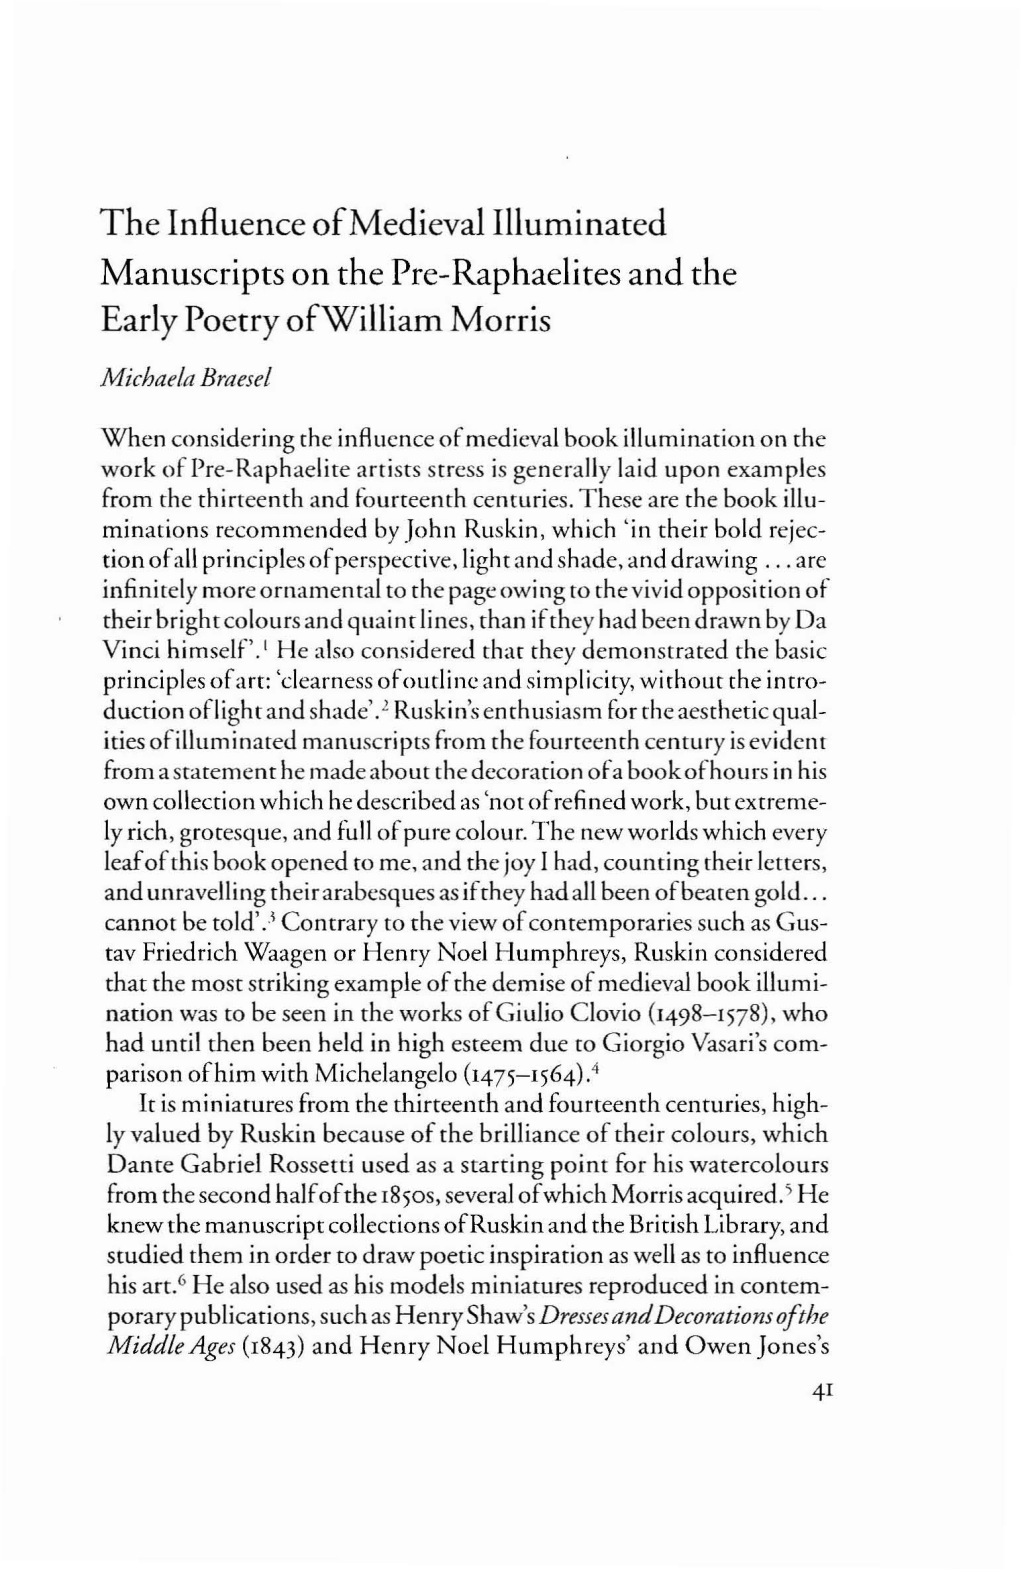 The Influence Ofmedieval Illuminated Manuscripts on the Pre-Raphaelites and the Early Poetry Ofwilliam Morris Michaela Braesel